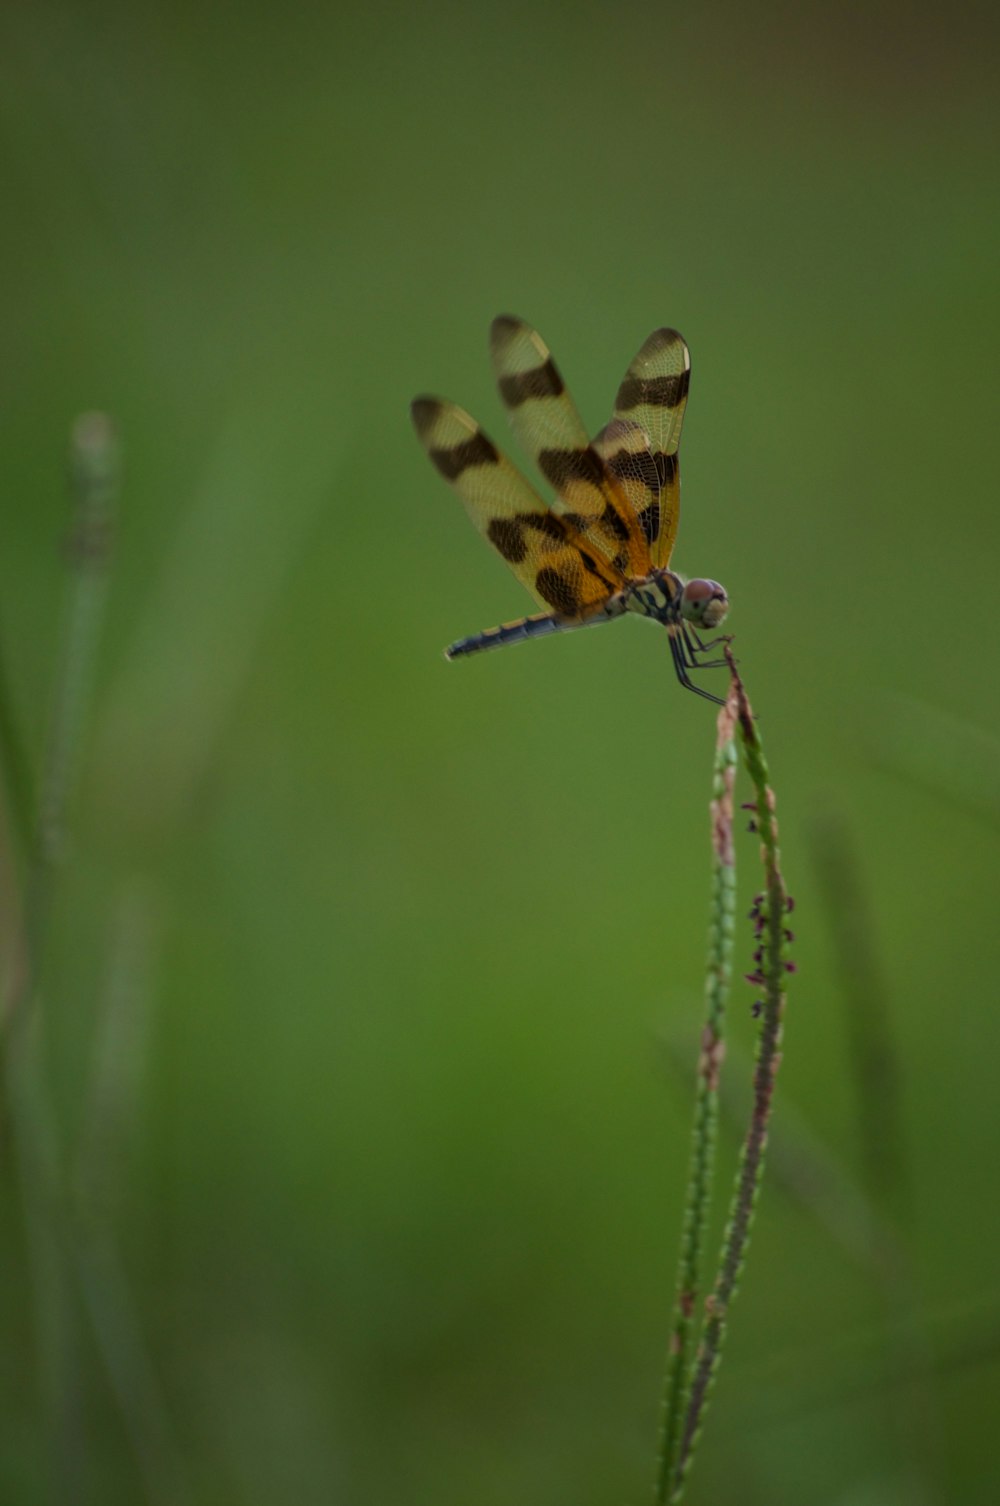 yellow and black dragonfly on green grass during daytime